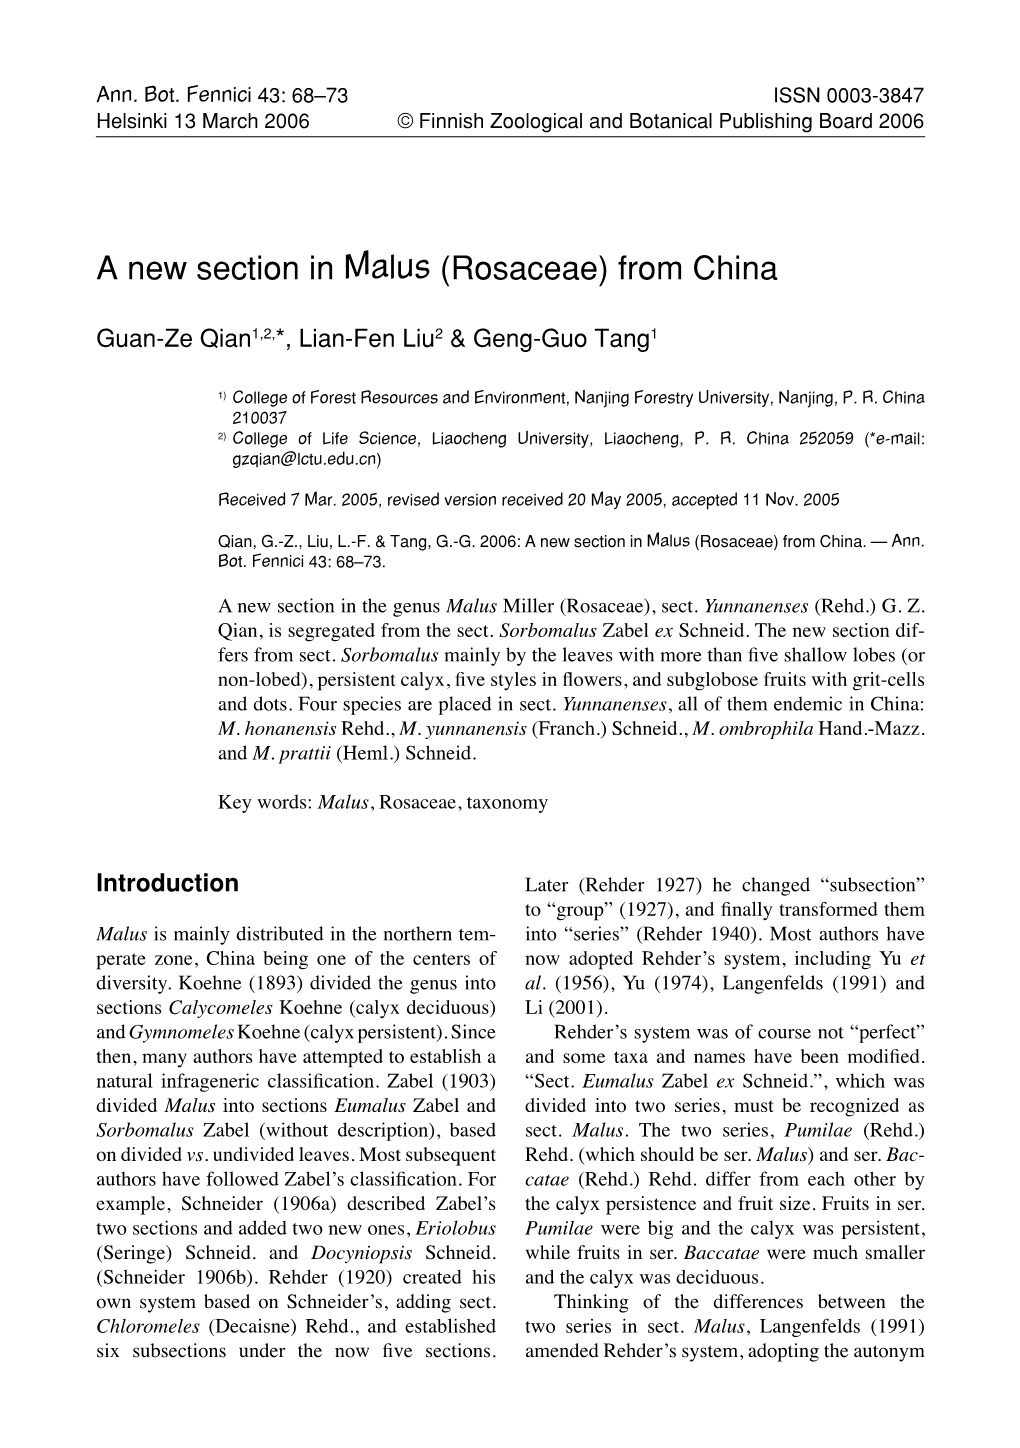 A New Section in Malus (Rosaceae) from China